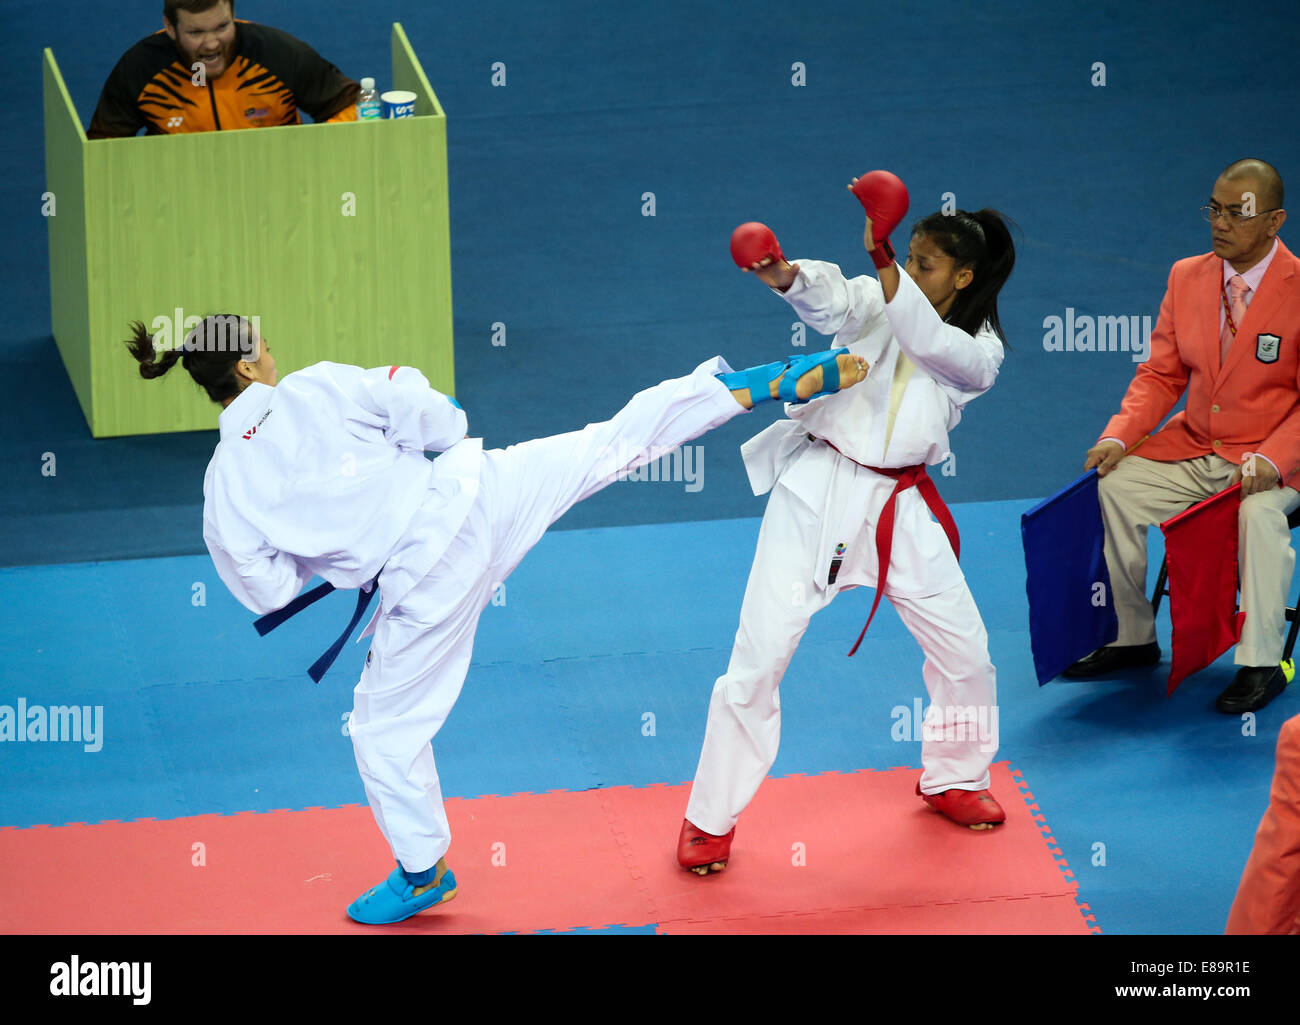 Incheon, South Korea. 3rd Oct, 2014. Yin Xiaoyan (L) of China fights against Jefry Krisnan Syakilla Salni Binti of Malaysia during the women's -61kg semifinal contest of karate at the 17th Asian Games in Incheon, South Korea, Oct. 3, 2014. Yin Xiaoyan lost 0-2. © Zhang Fan/Xinhua/Alamy Live News Stock Photo